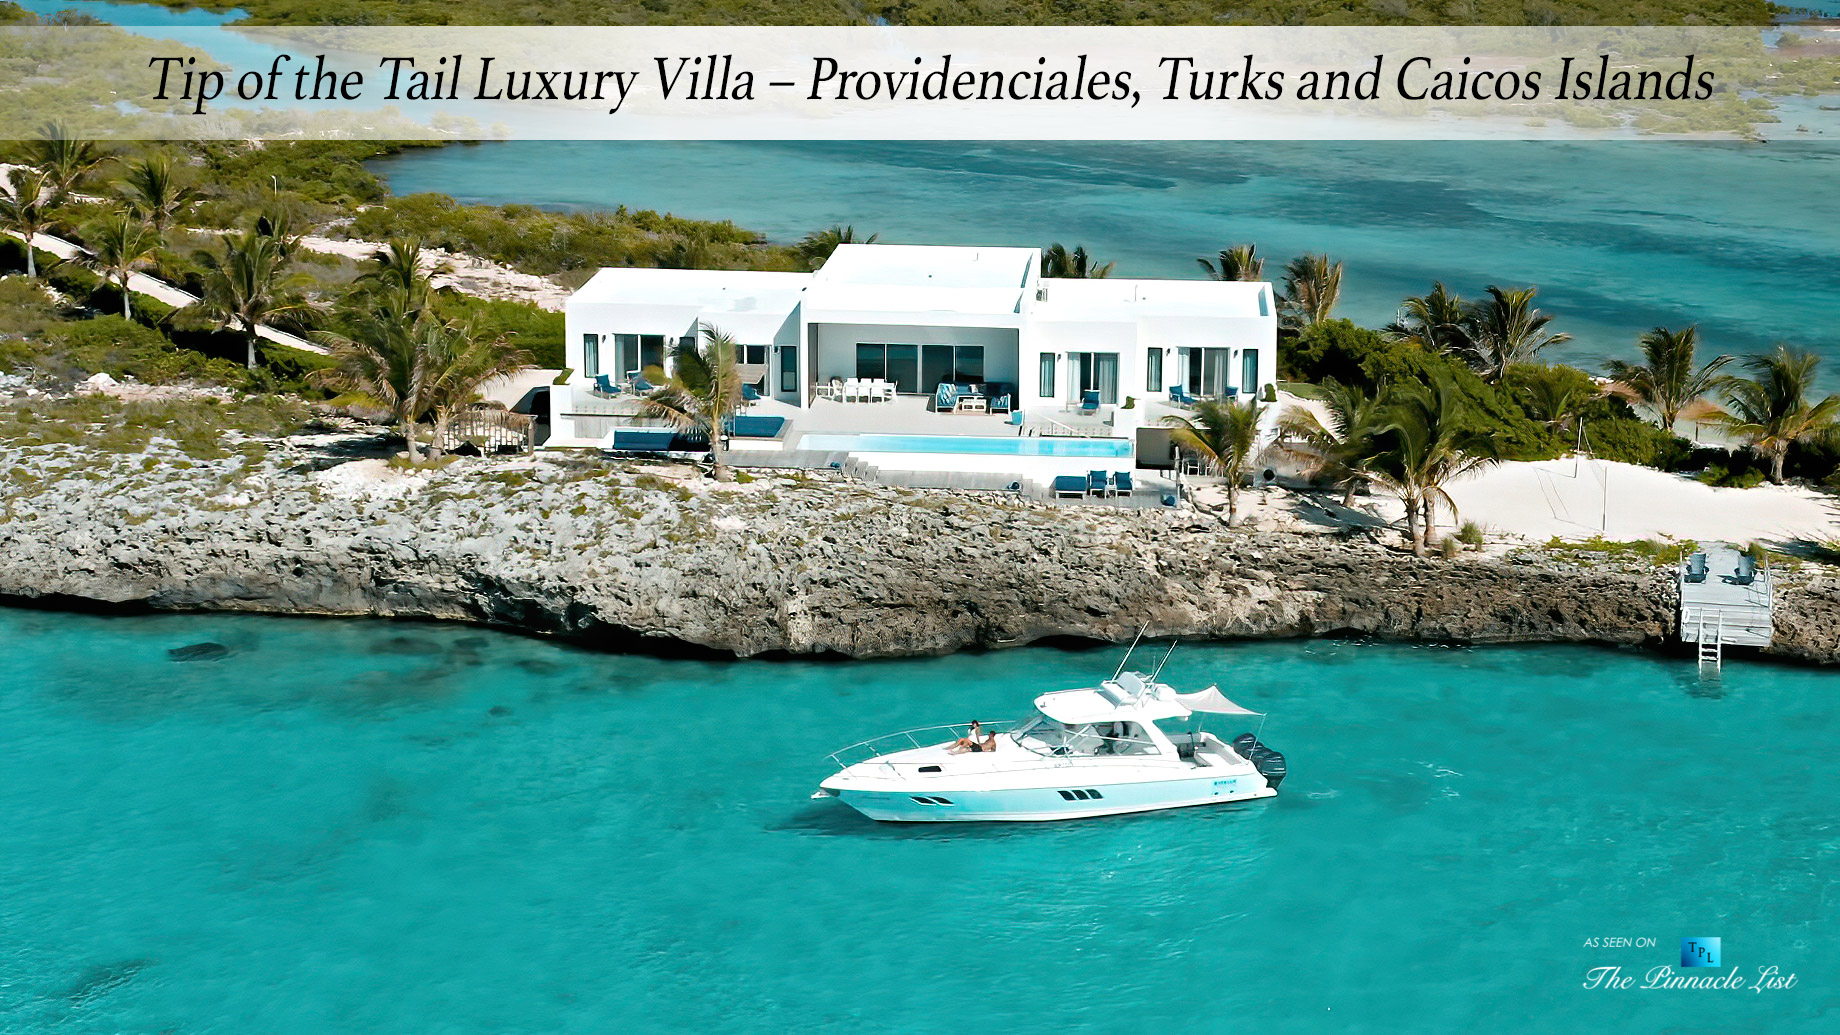 Tip of the Tail Luxury Villa – Providenciales, Turks and Caicos Islands